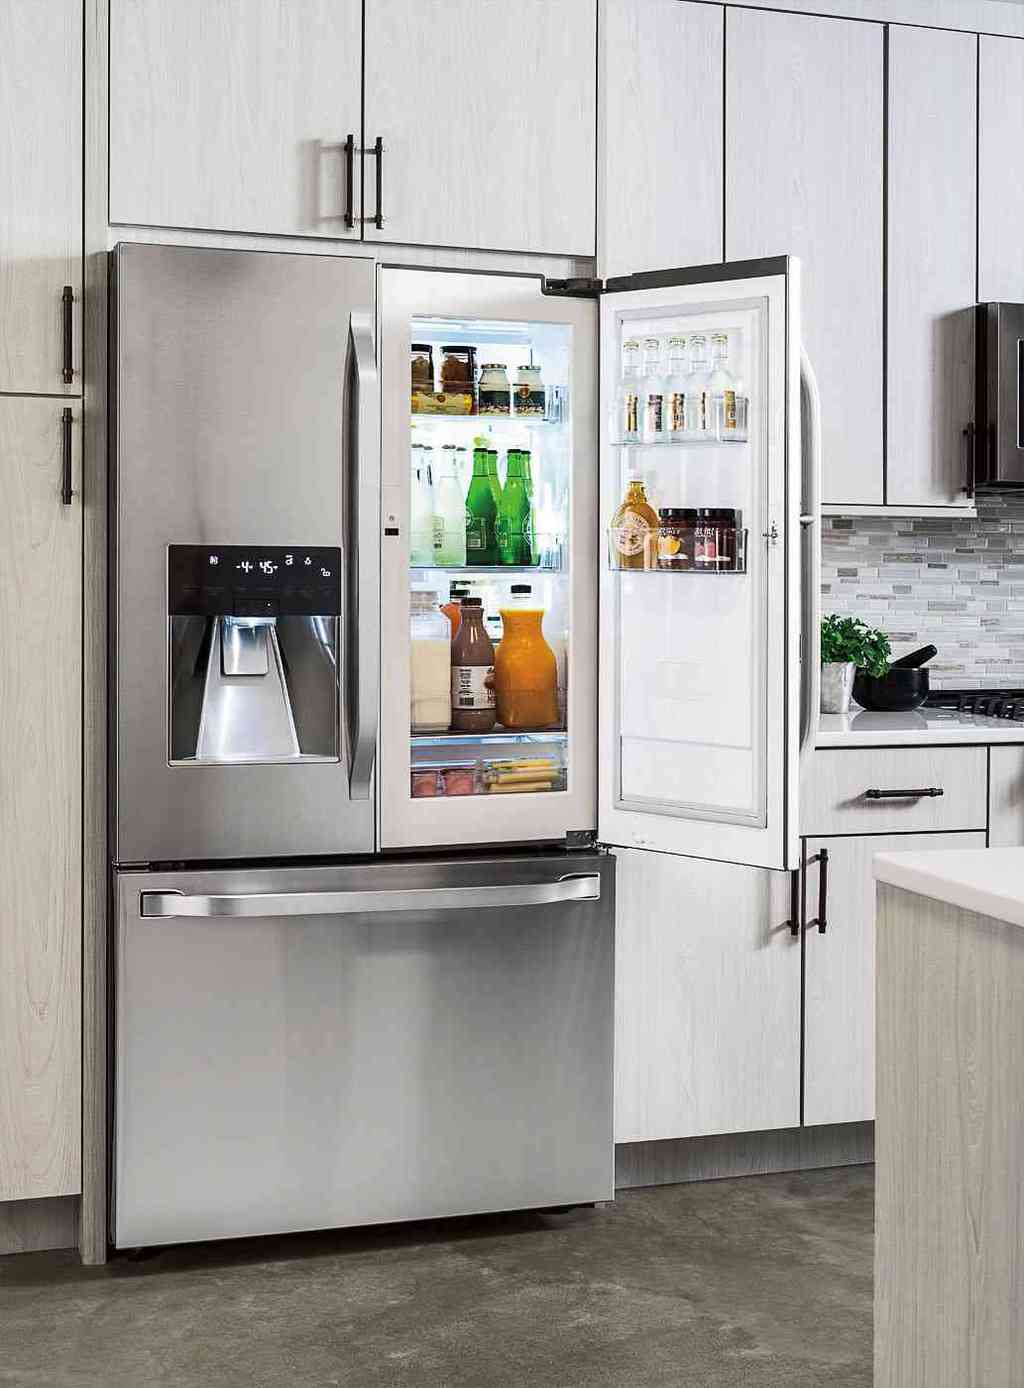 Green Your Appliances with LG Studio